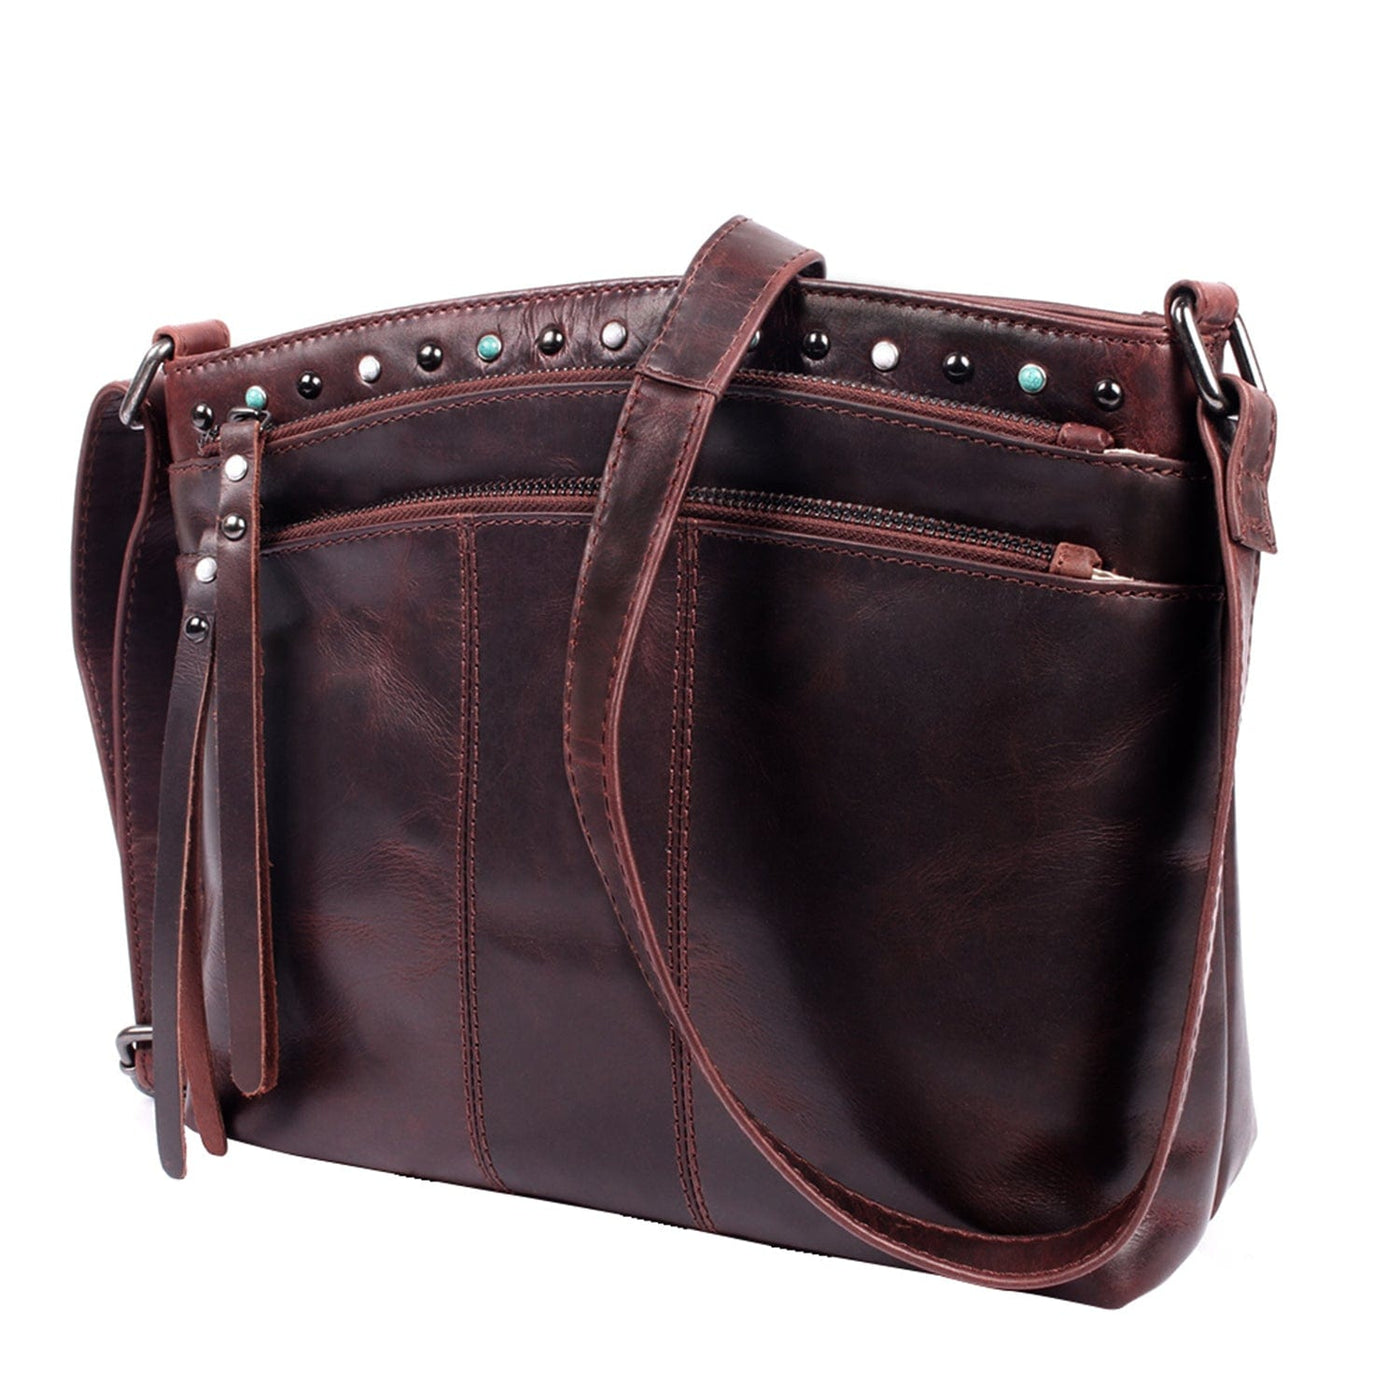 Concealed Carry Brynn Arched Leather Crossbody Bag - Lady Conceal - Concealed Carry Purse - Lady Conceal - conceal and cary purse for women - tactical pistol bag -  Locking Conceal and Carry Purse with Universal Holster for Handguns